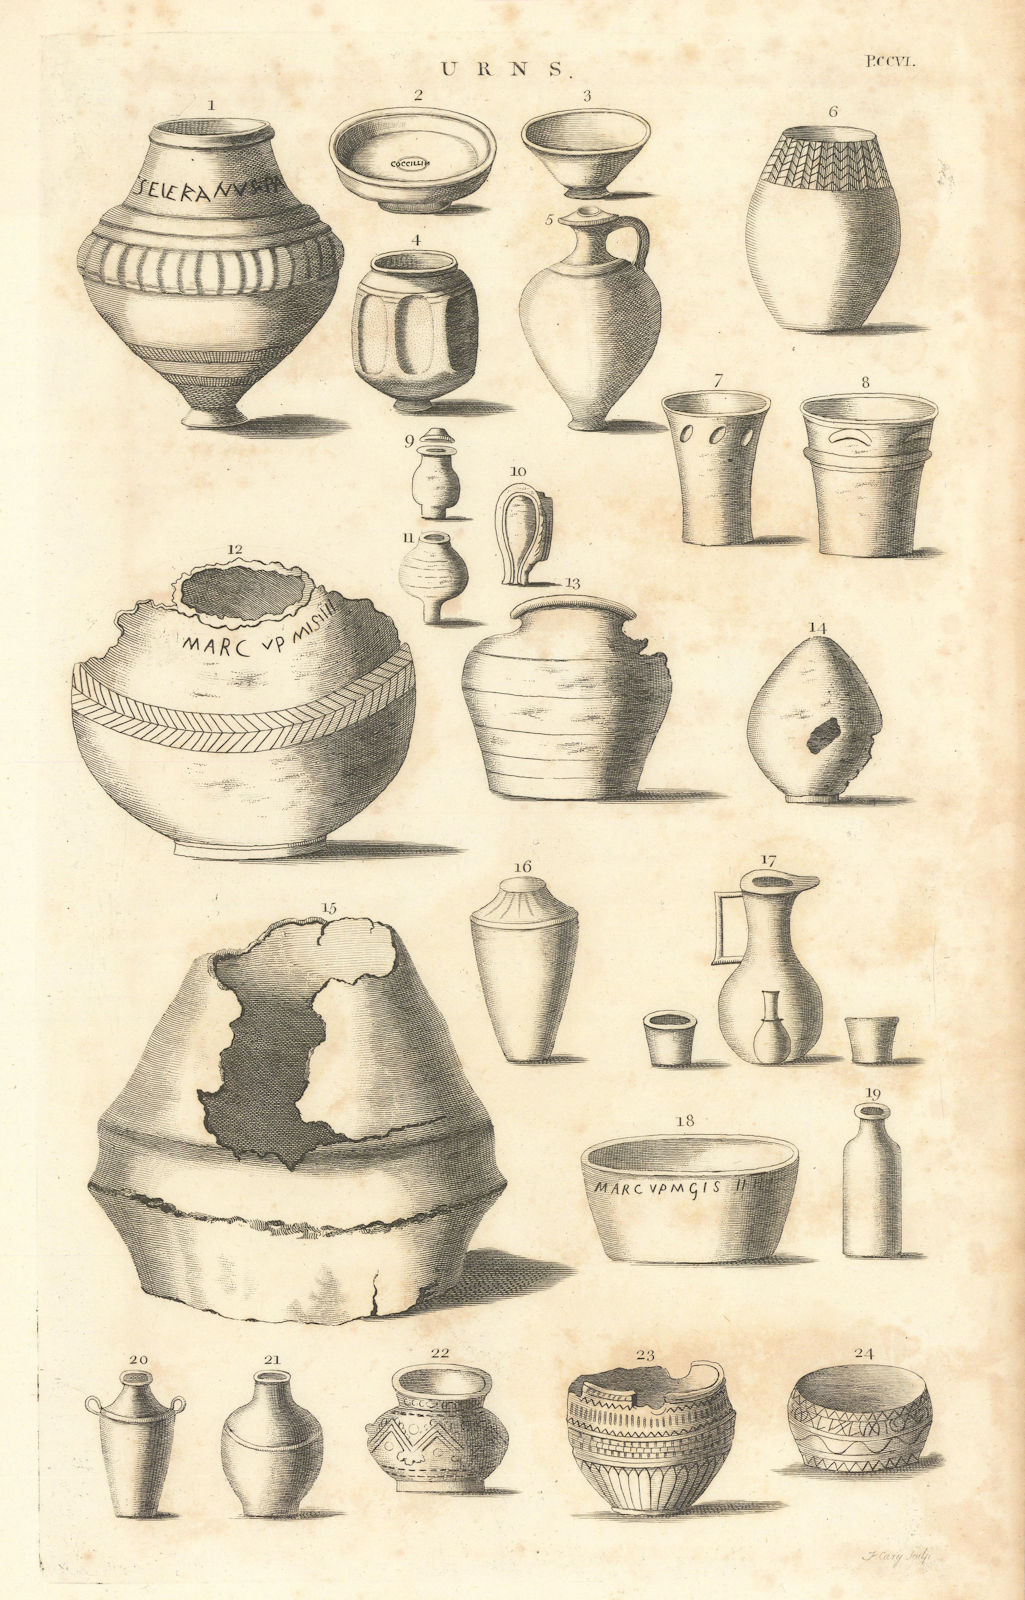 Associate Product Romano-British Urns. Antique print 1806 old vintage picture